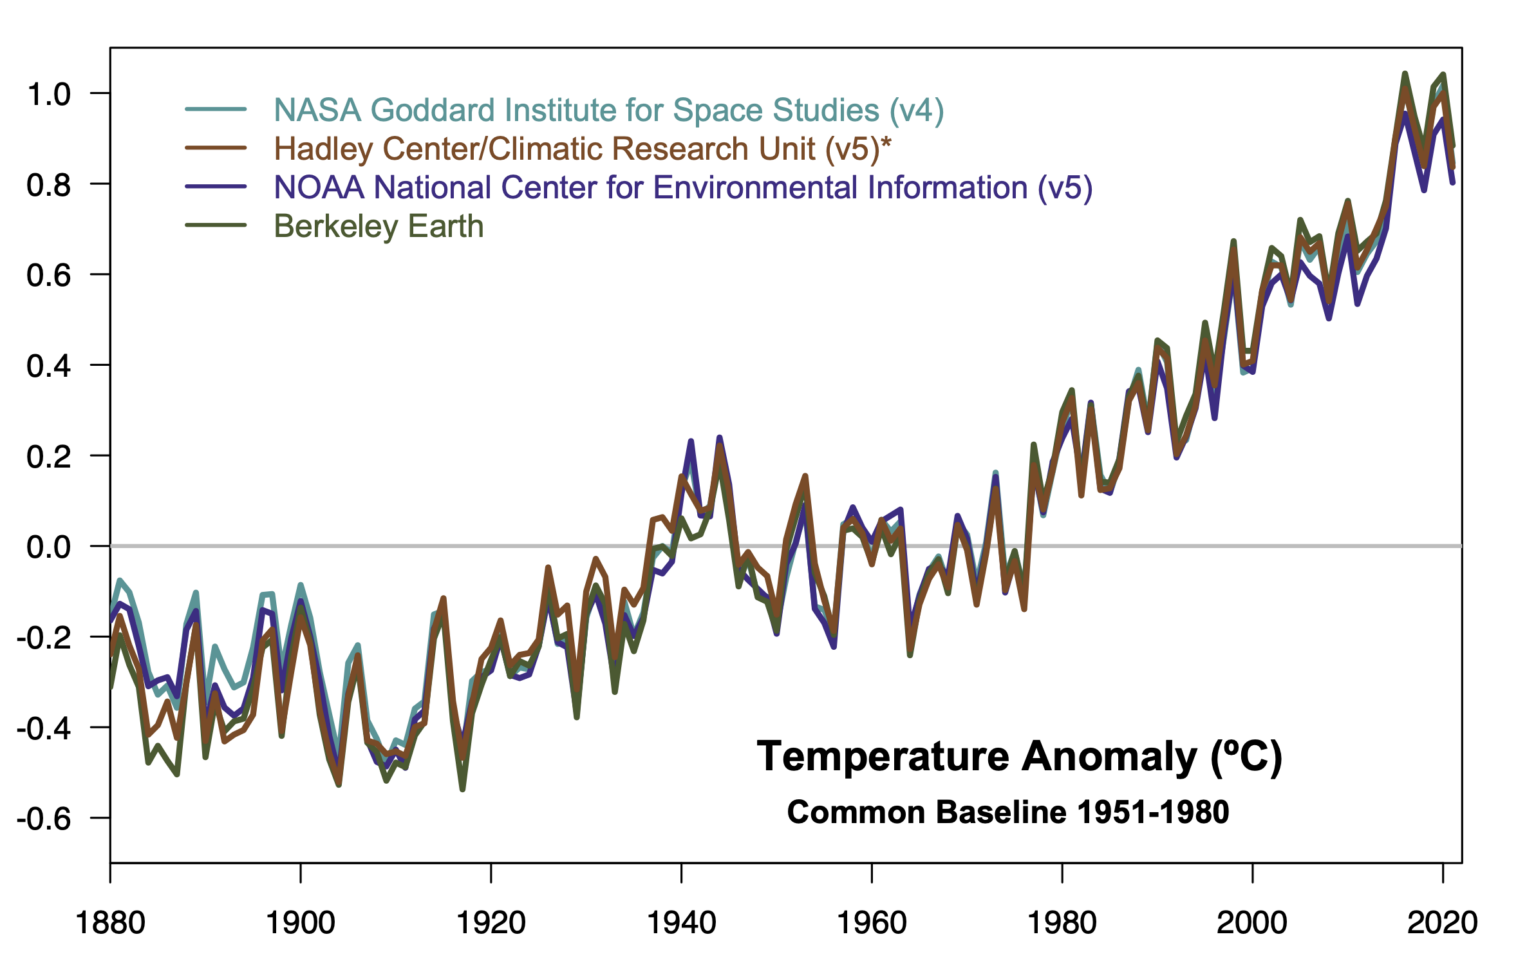 Temperature data show rapid warming in recent decades, the latest data going forward to 2021.